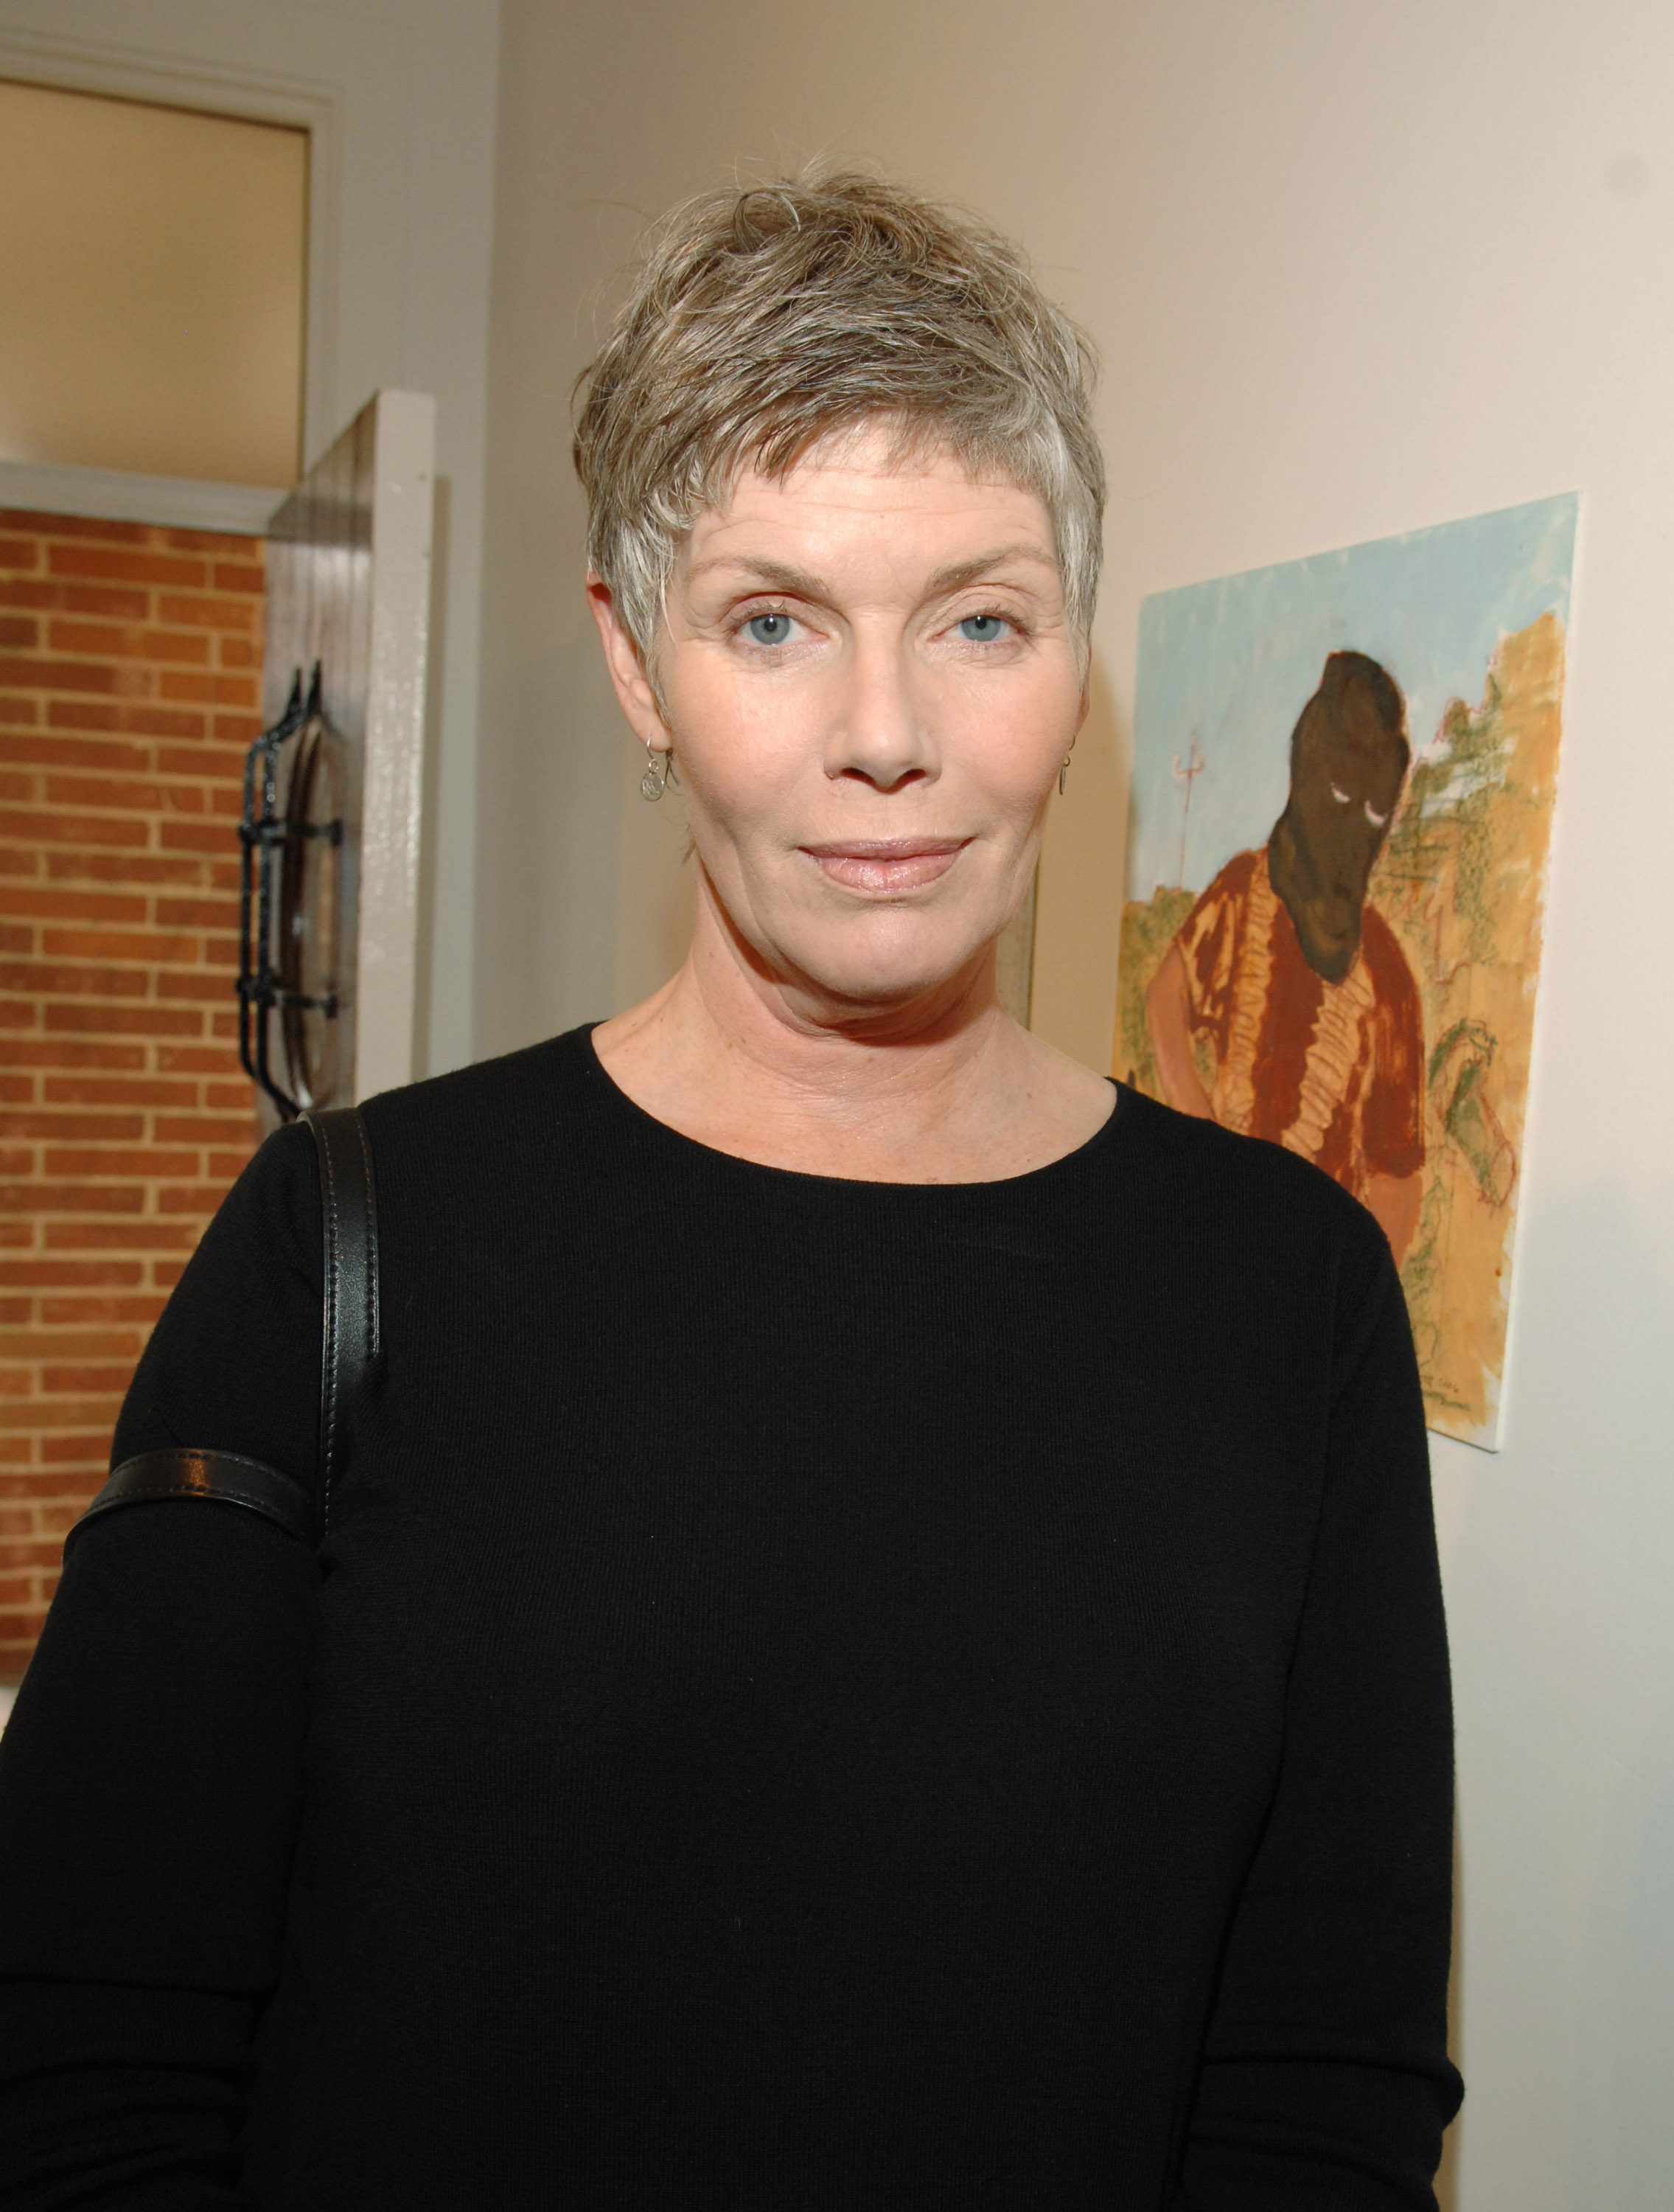 L'actrice lors de l'exposition d'art Paintings by Mary Lambert le 7 avril 2007. | Source : Getty Images